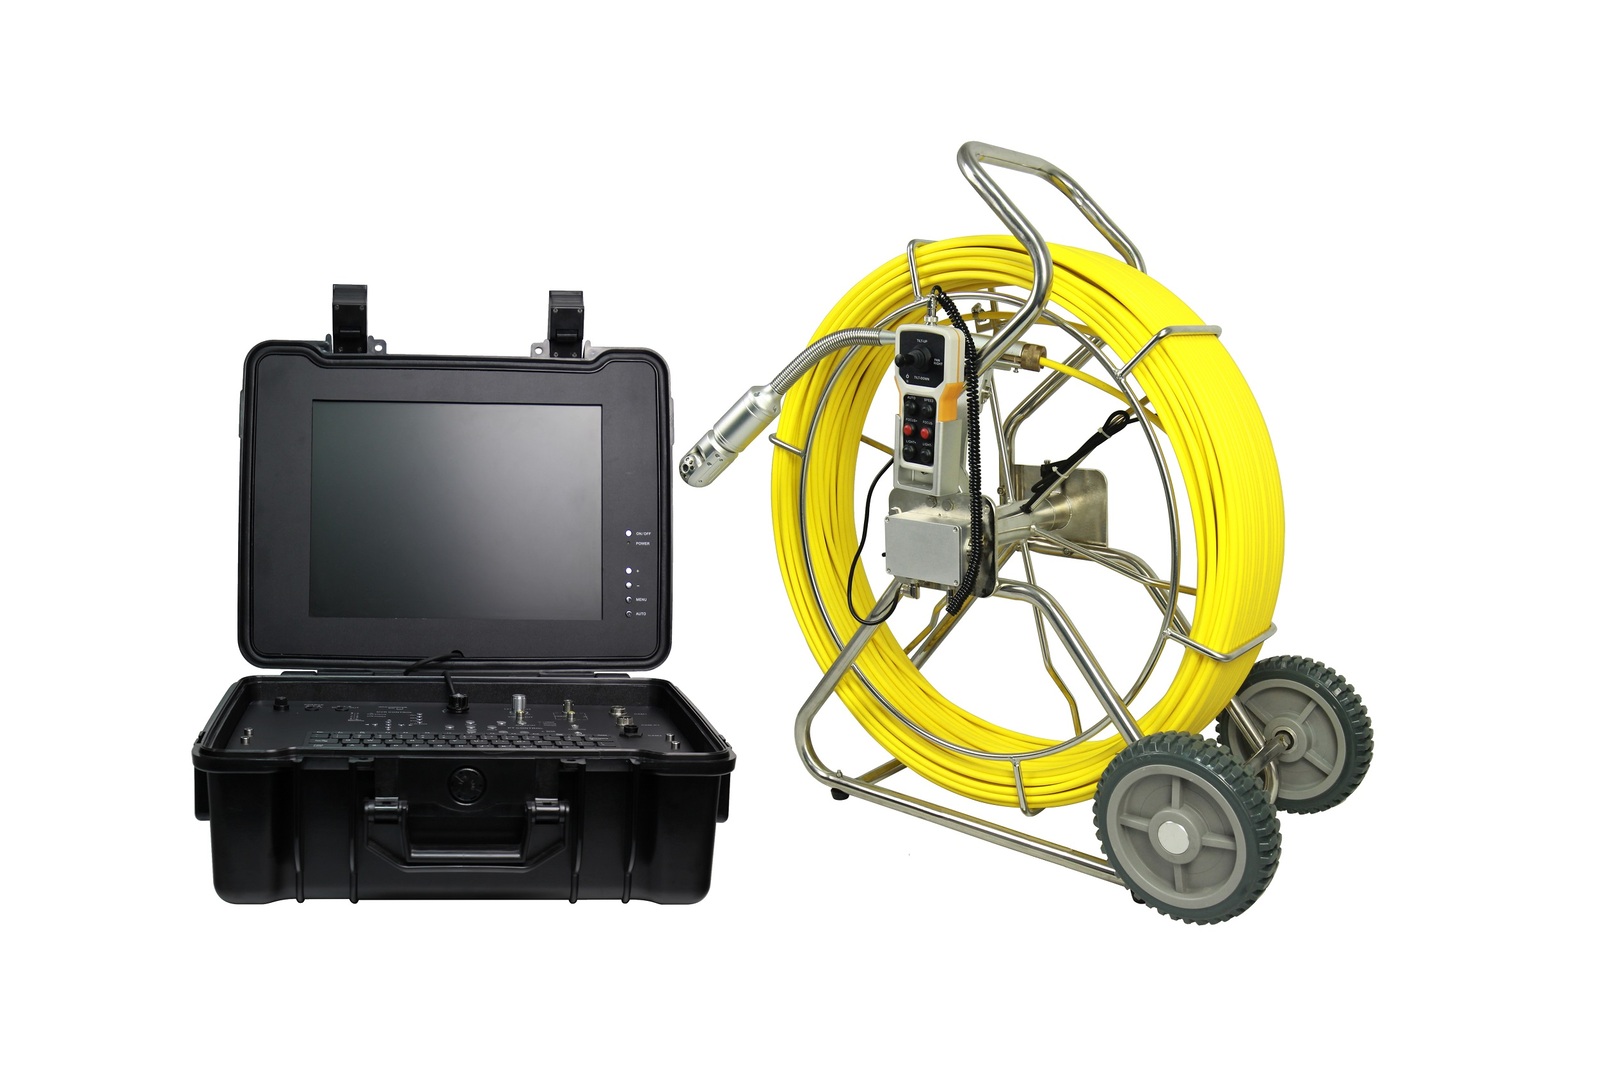 Pipe Inspection Camera System